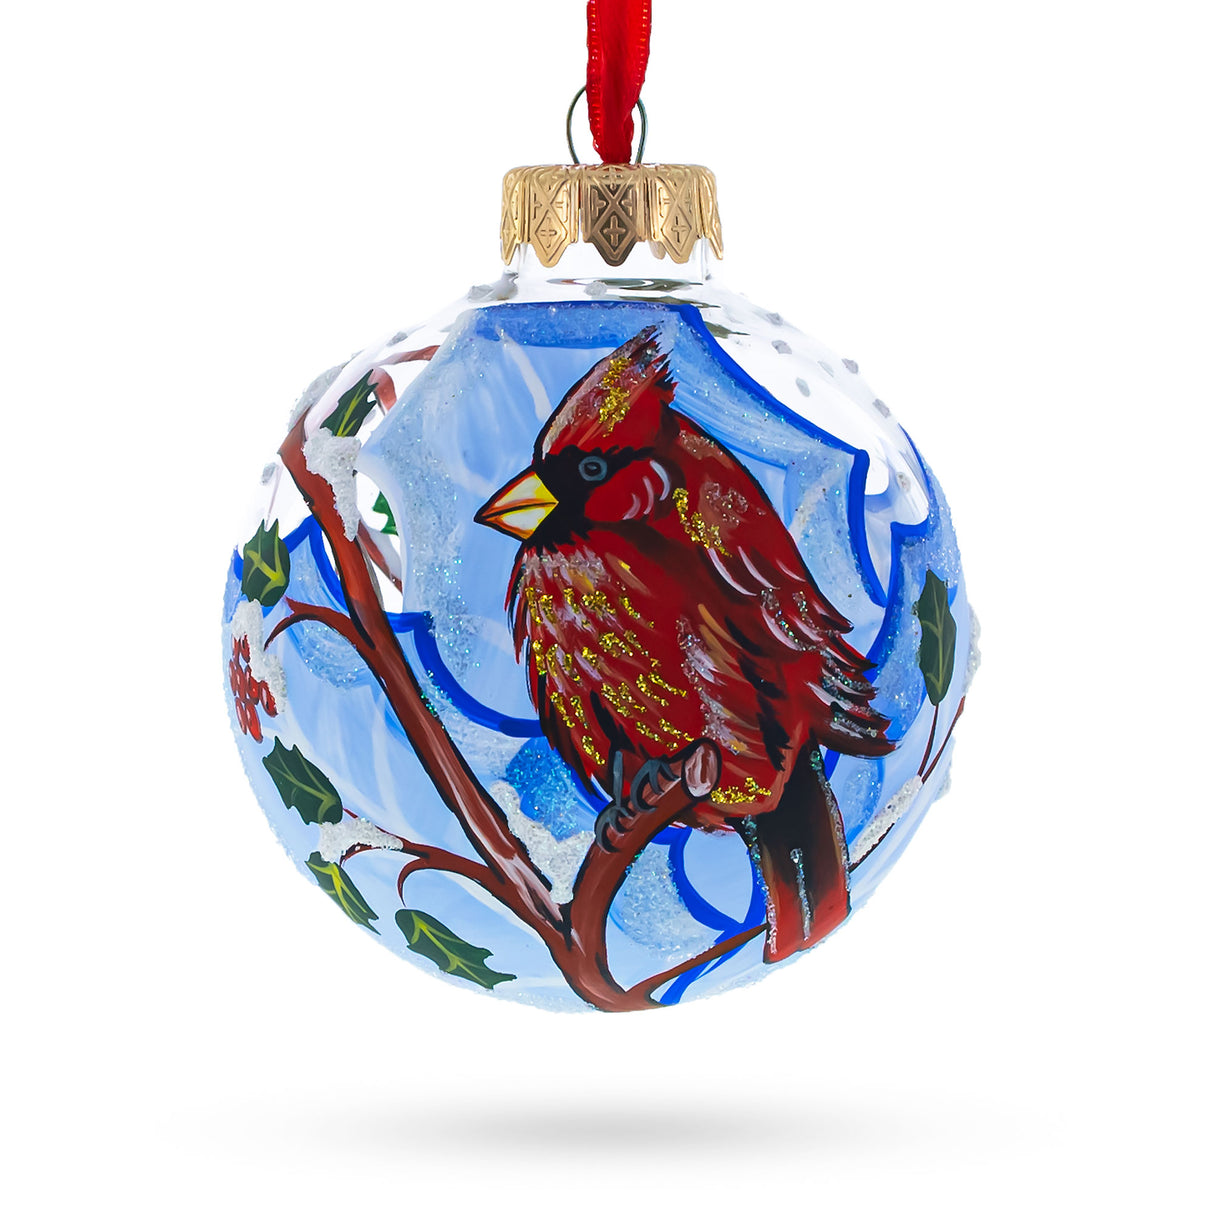 Glass Frosty Winter Cardinal - Blown Glass Ball Christmas Ornament 3.25 Inches in Multi color Round